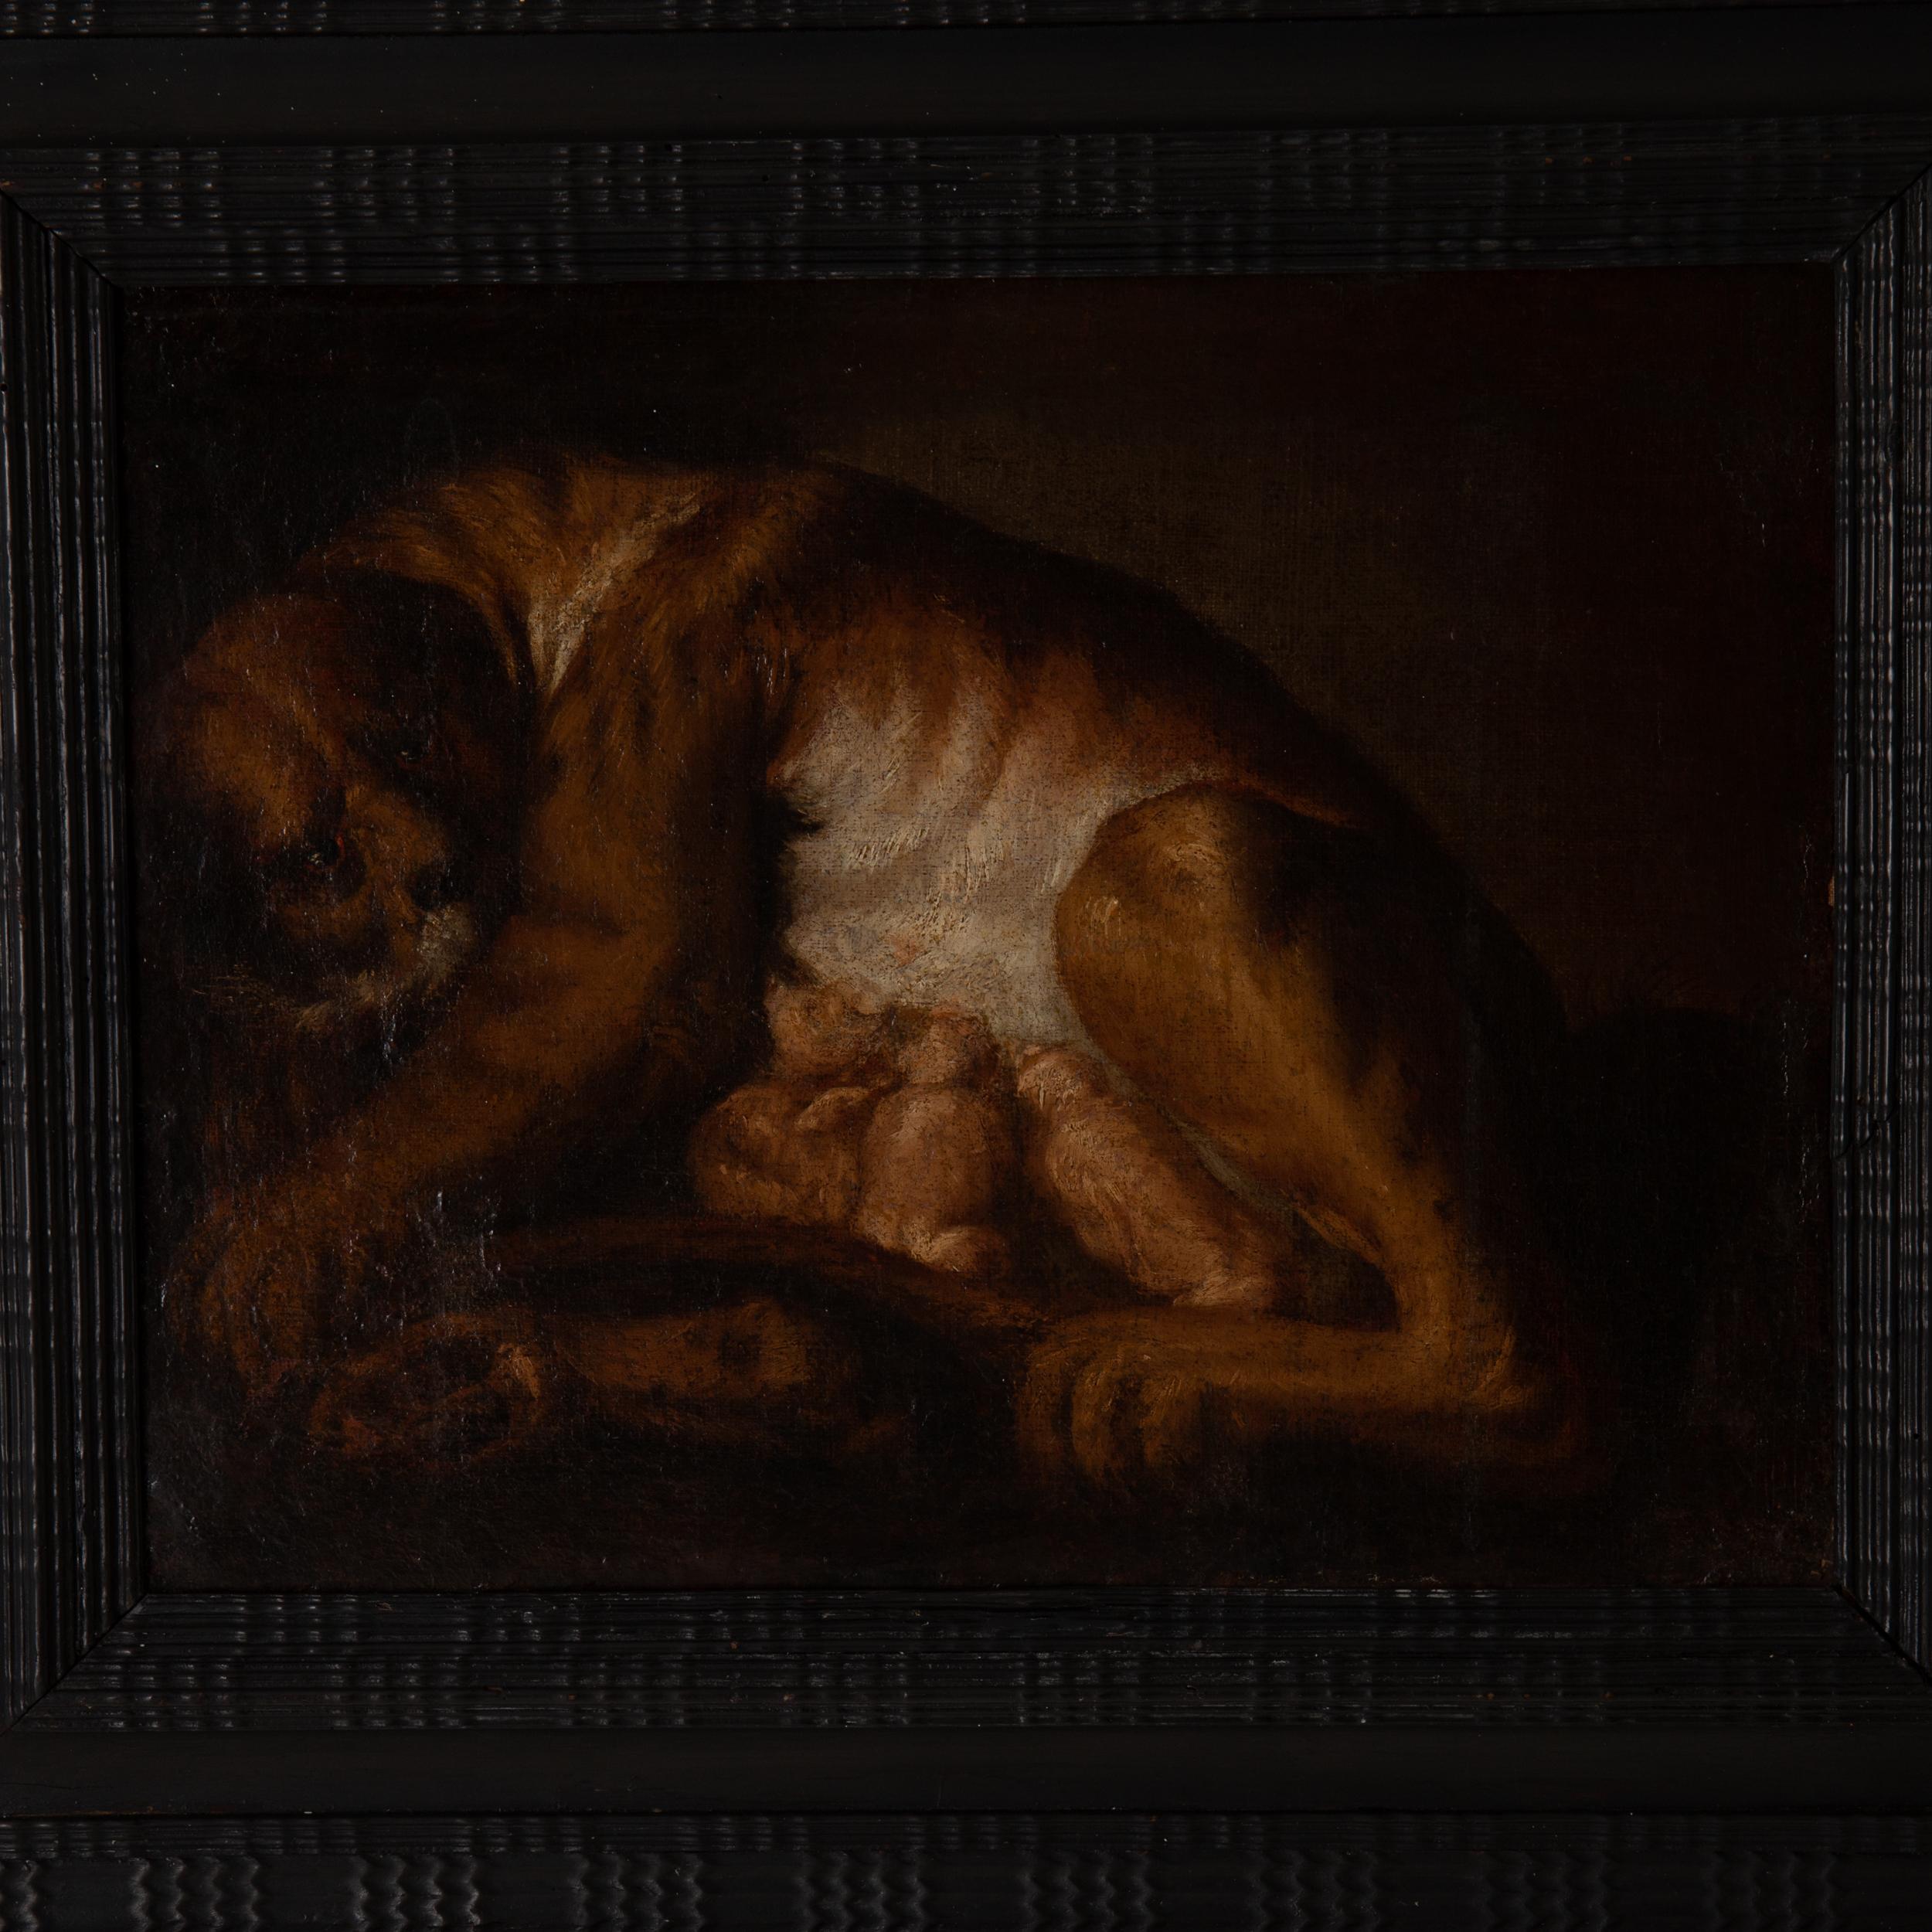 Painting oil on canvas baroque period original black baroque frame. A painting made during the baroque period in its original frame. Subject lioness with her cubs.

 